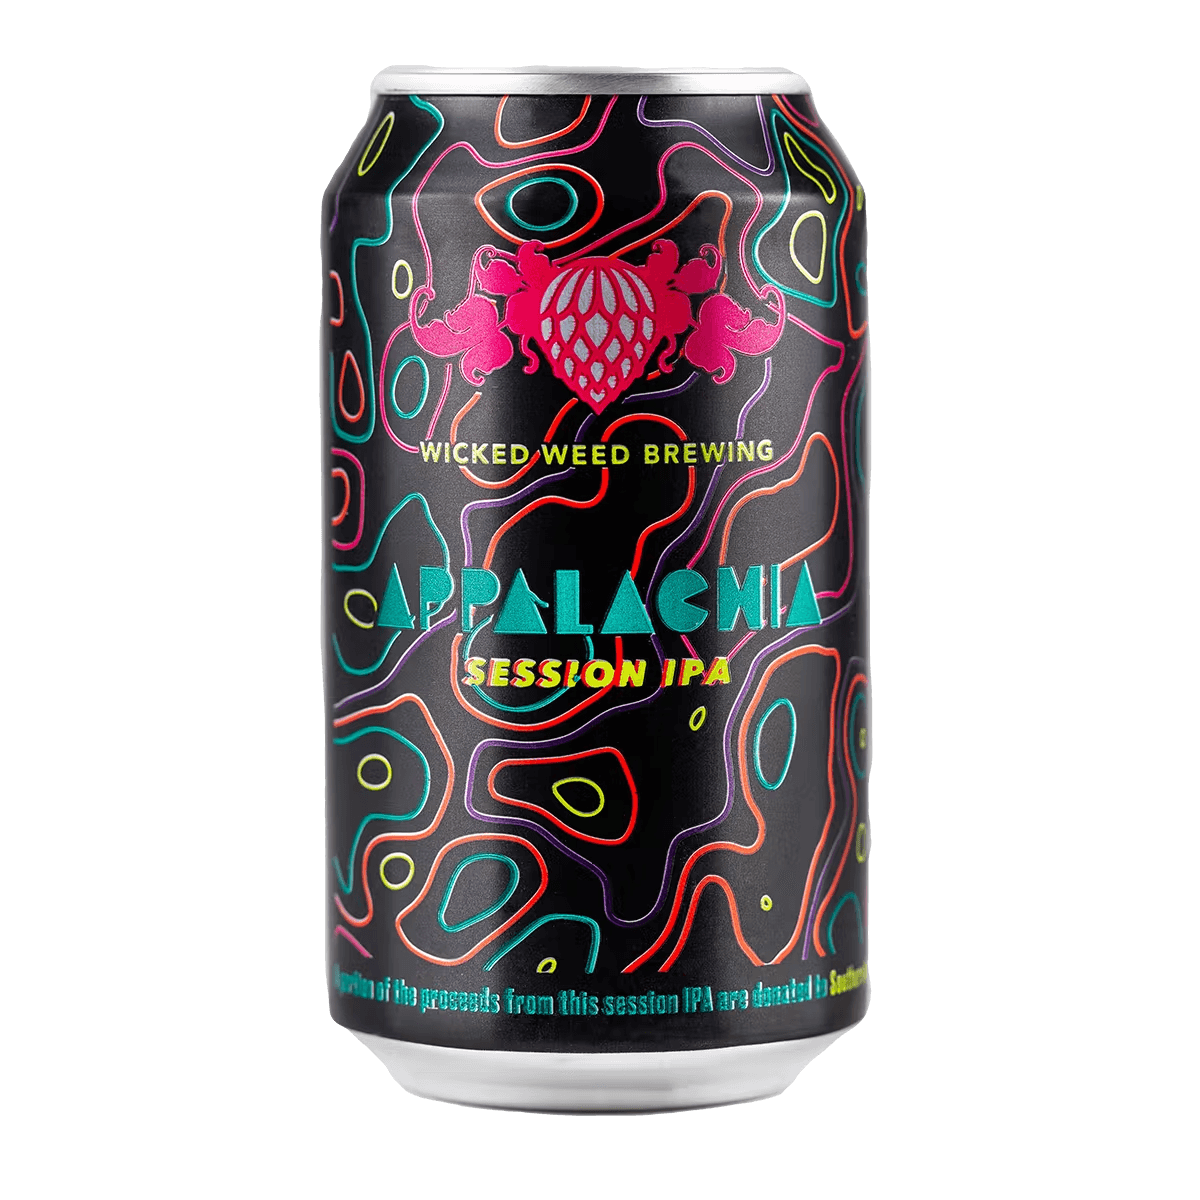 Wicked Weed Brewing's {"id":522,"brewery_id":146,"name":"Appalachia","image":"appalachia.png","slug":"wicked-weed-brewing\/appalachia","calories":null,"abv":"4.7","ibu":null,"type":"Ale","style":"Session IPA","description":"This easy-drinking session IPA boasts huge hop flavor and aroma from Amarillo, Citra, Mosaic, and Motueka hops, with low bitterness and low ABV. Additionally, a portion of proceeds from this session IPA benefit the Southern Appalachian Highlands Conservancy, which protects our mountains and water.","available":"All Year","created_at":null,"updated_at":null,"brewery":{"id":146,"user_id":null,"name":"Wicked Weed Brewing","slug":null,"logo":null,"description":"Wicked Weed was imagined, created, and brought to life by the Dickinsons and the Guthys; two families that have been lifelong friends, each bringing a unique skill to the collective ownership team.\r\n\r\n","website":"https:\/\/www.wickedweedbrewing.com\/","address":"91 Biltmore Ave.<br>\r\nAsheville, NC 28801","facebook_url":null,"twitter_url":null,"instagram_url":null,"created_at":null,"updated_at":null}}